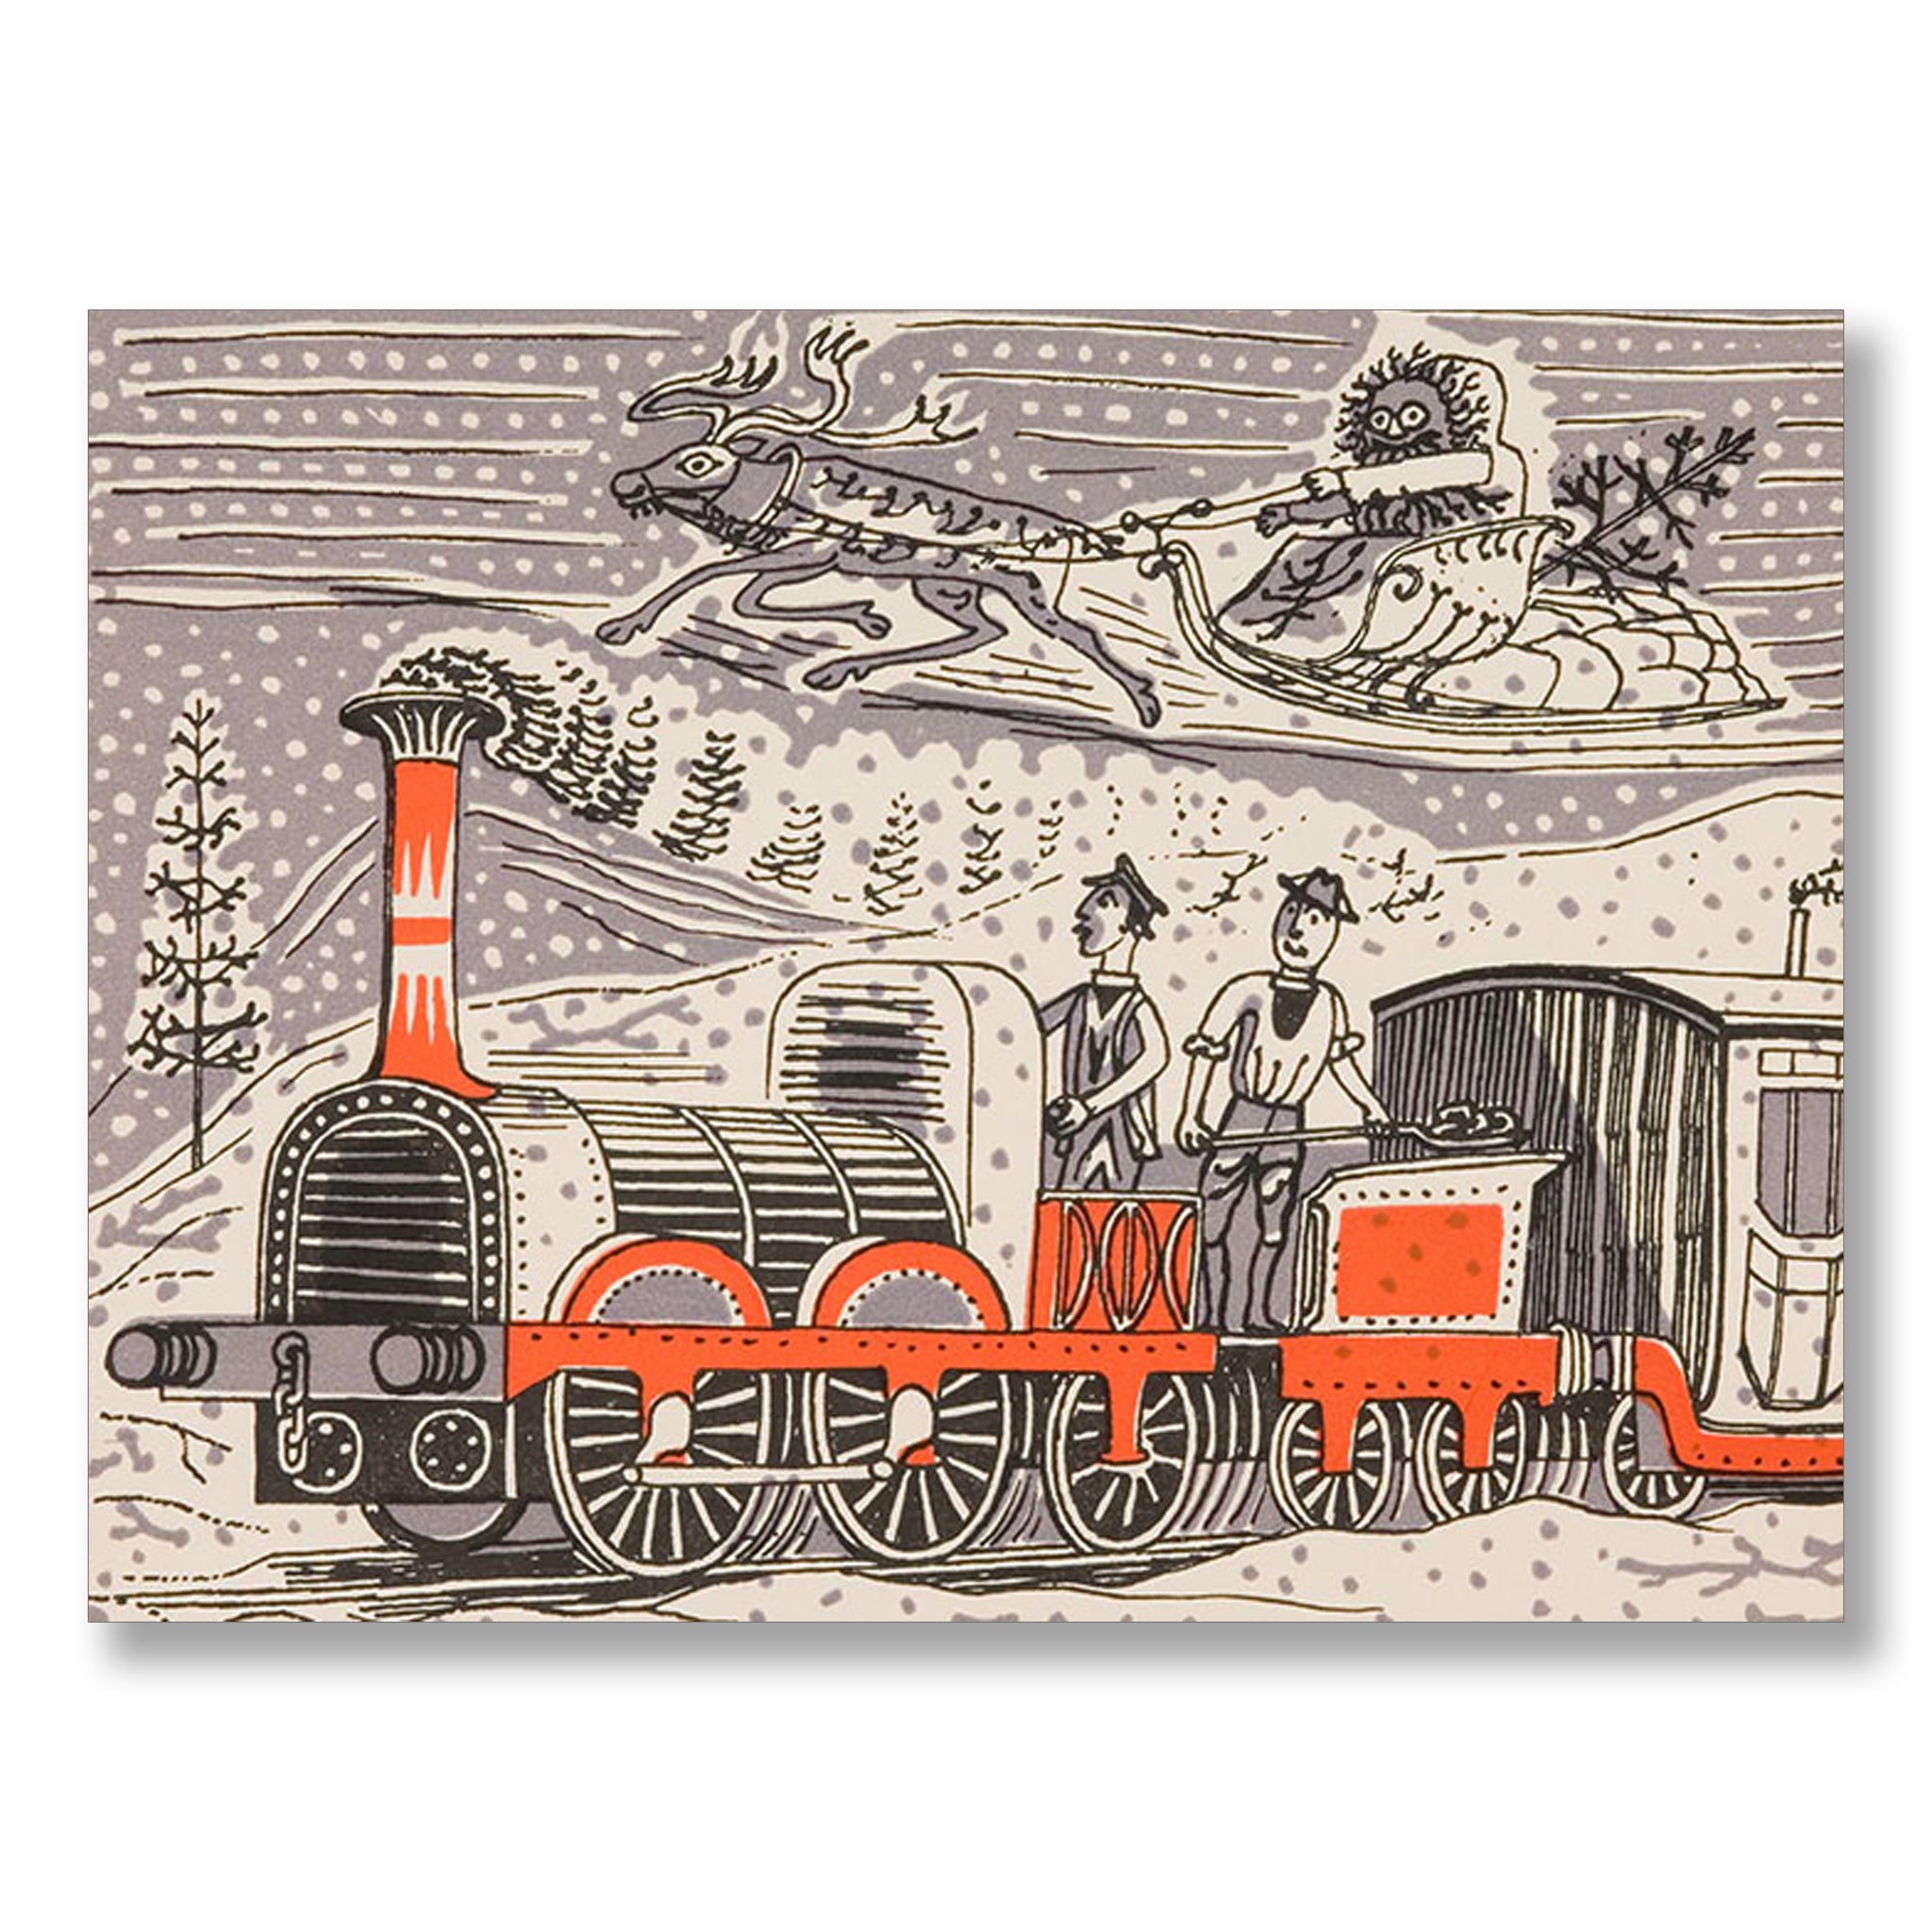 The Titfield Thunderbolt at Christmas by Edward Bawden